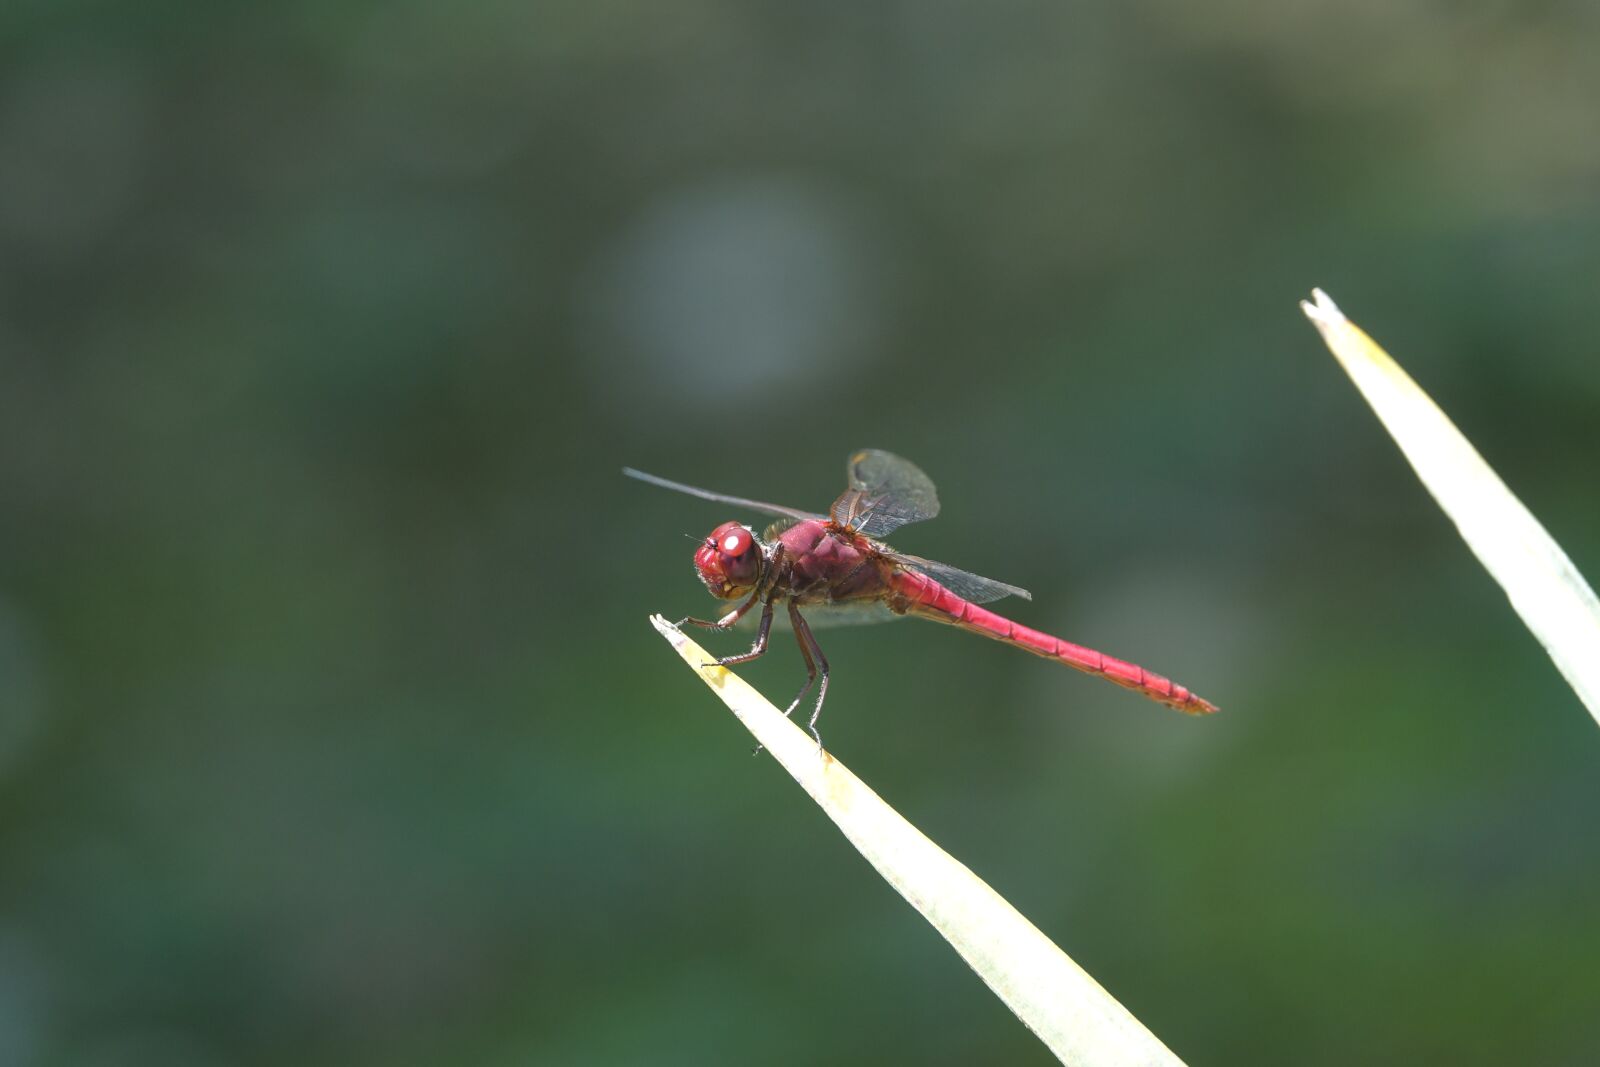 Sony Cyber-shot DSC-RX10 III sample photo. Dragonfly, insect, nature photography